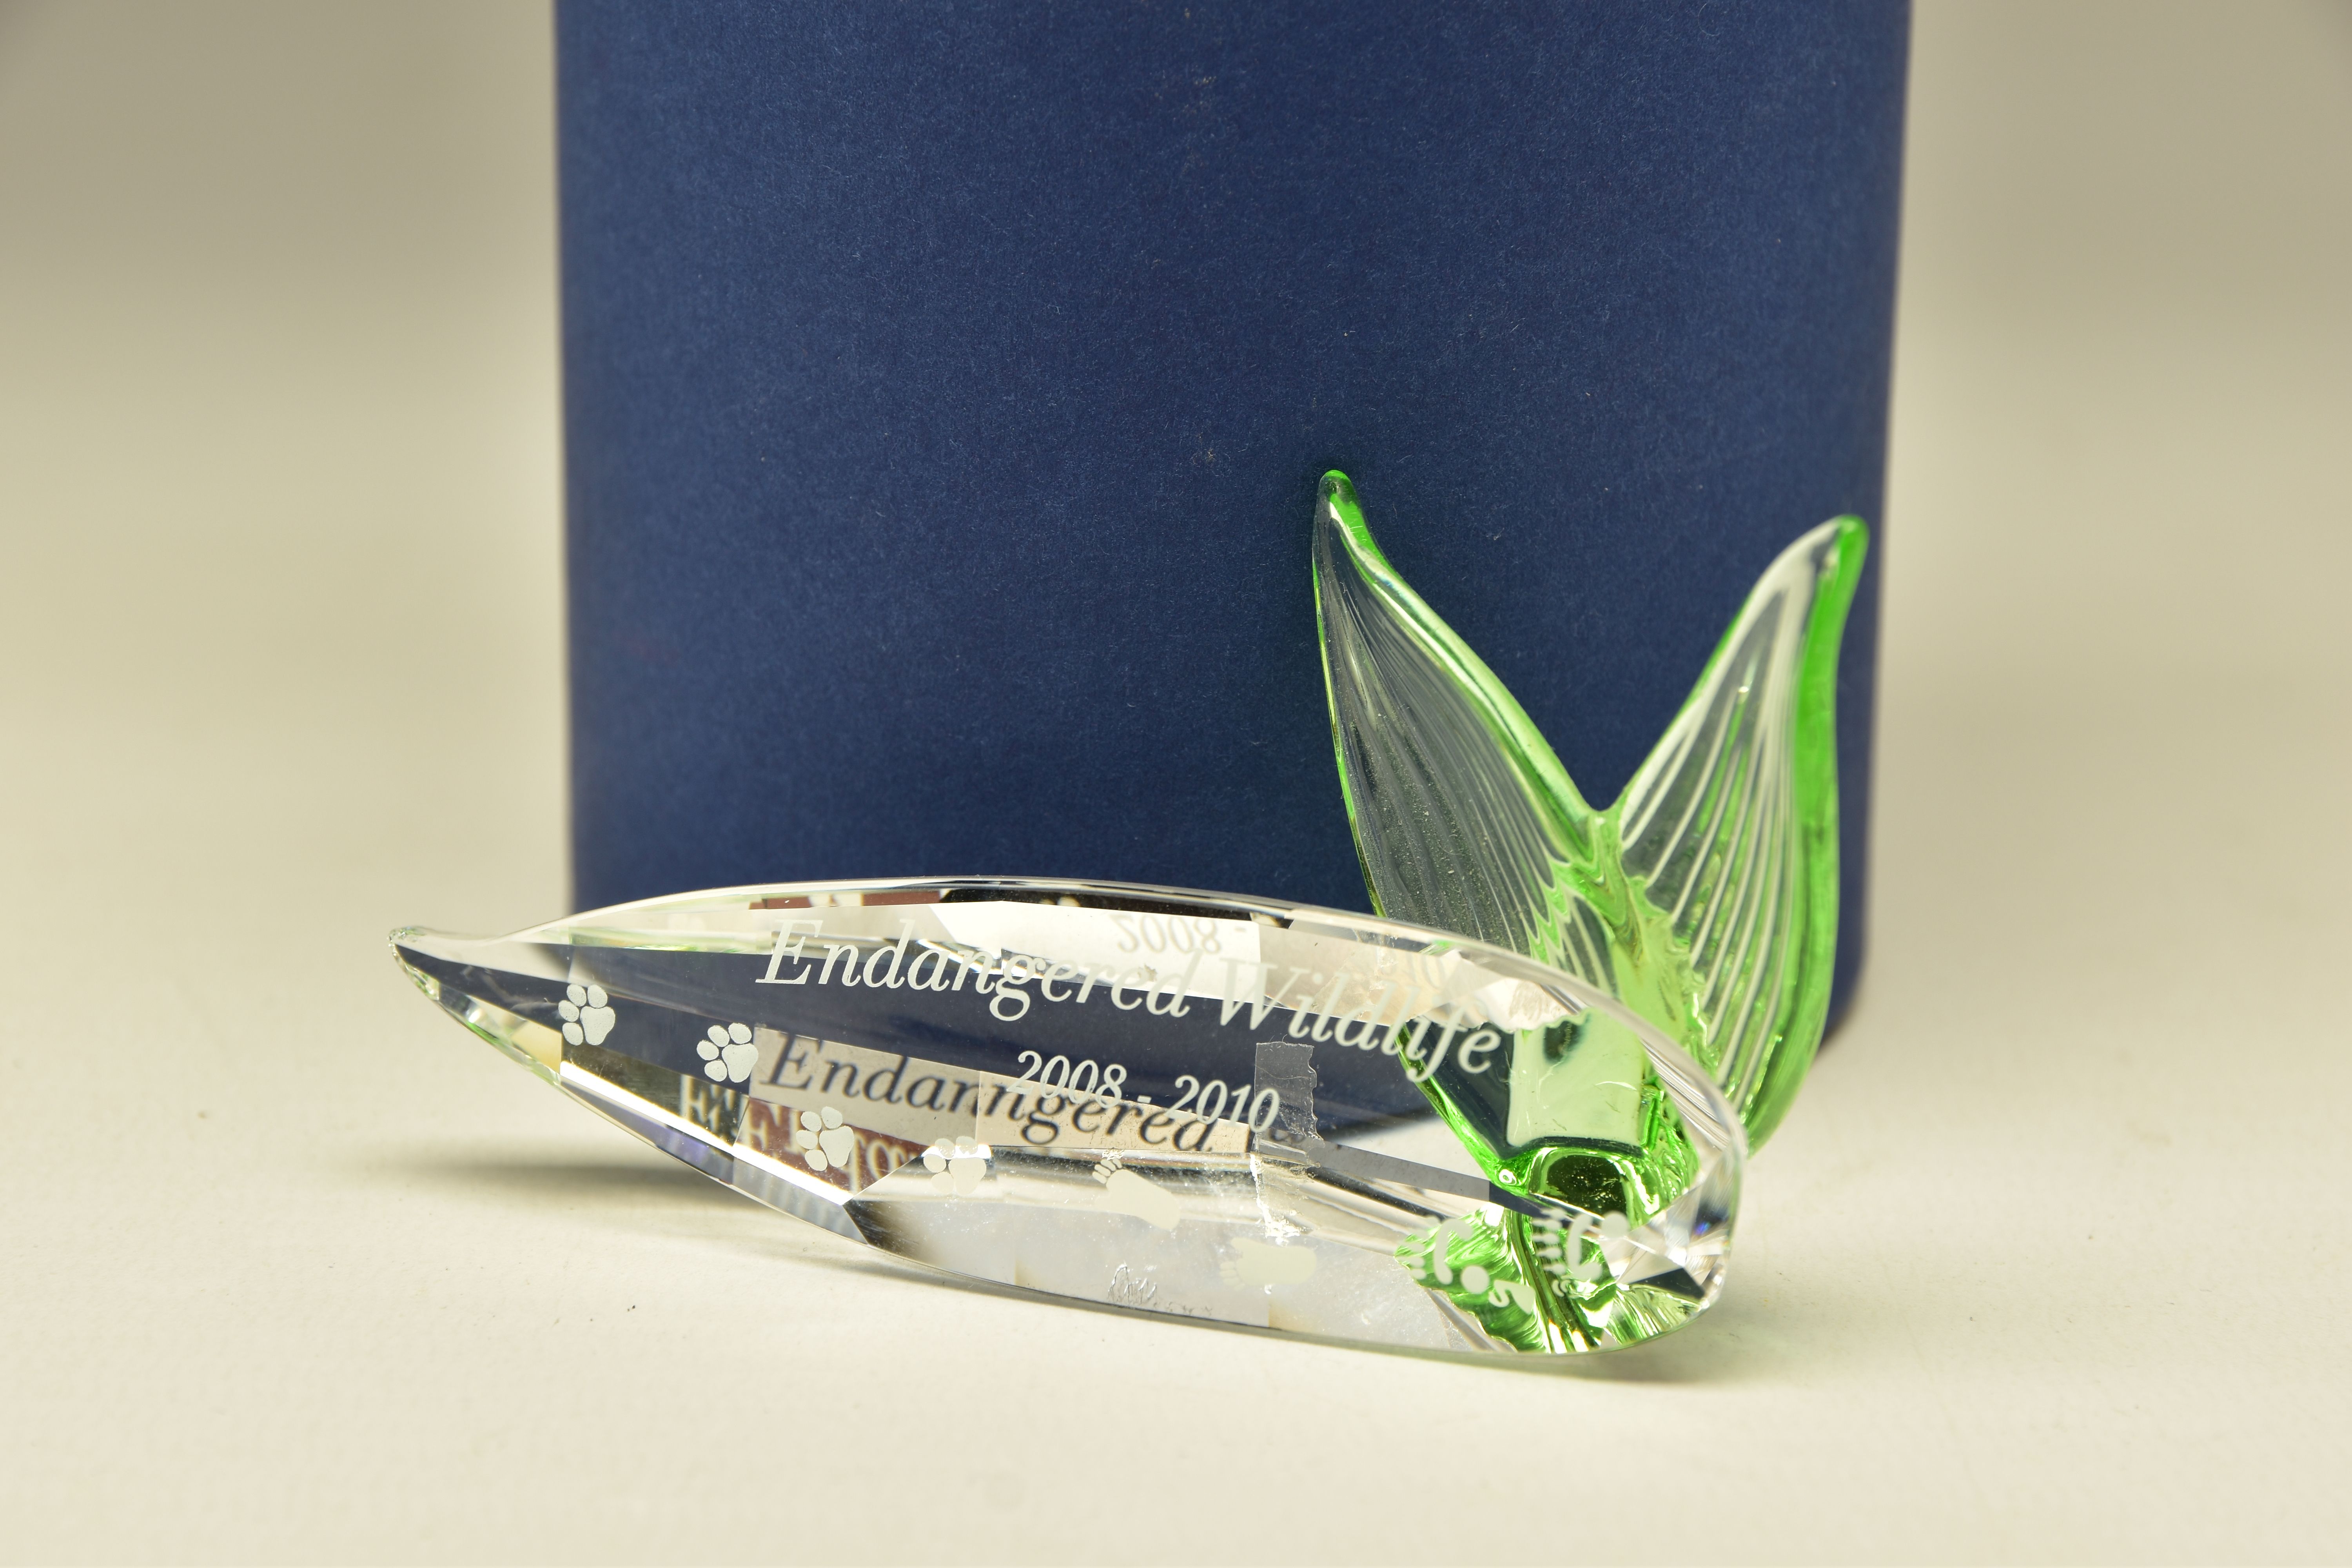 A BOXED SWAROVSKI CRYSTAL SOCIETY ENDANGERED WILDLIFE TITLE PLAQUE 2008-2010, (906929), height 4cm x - Image 3 of 4